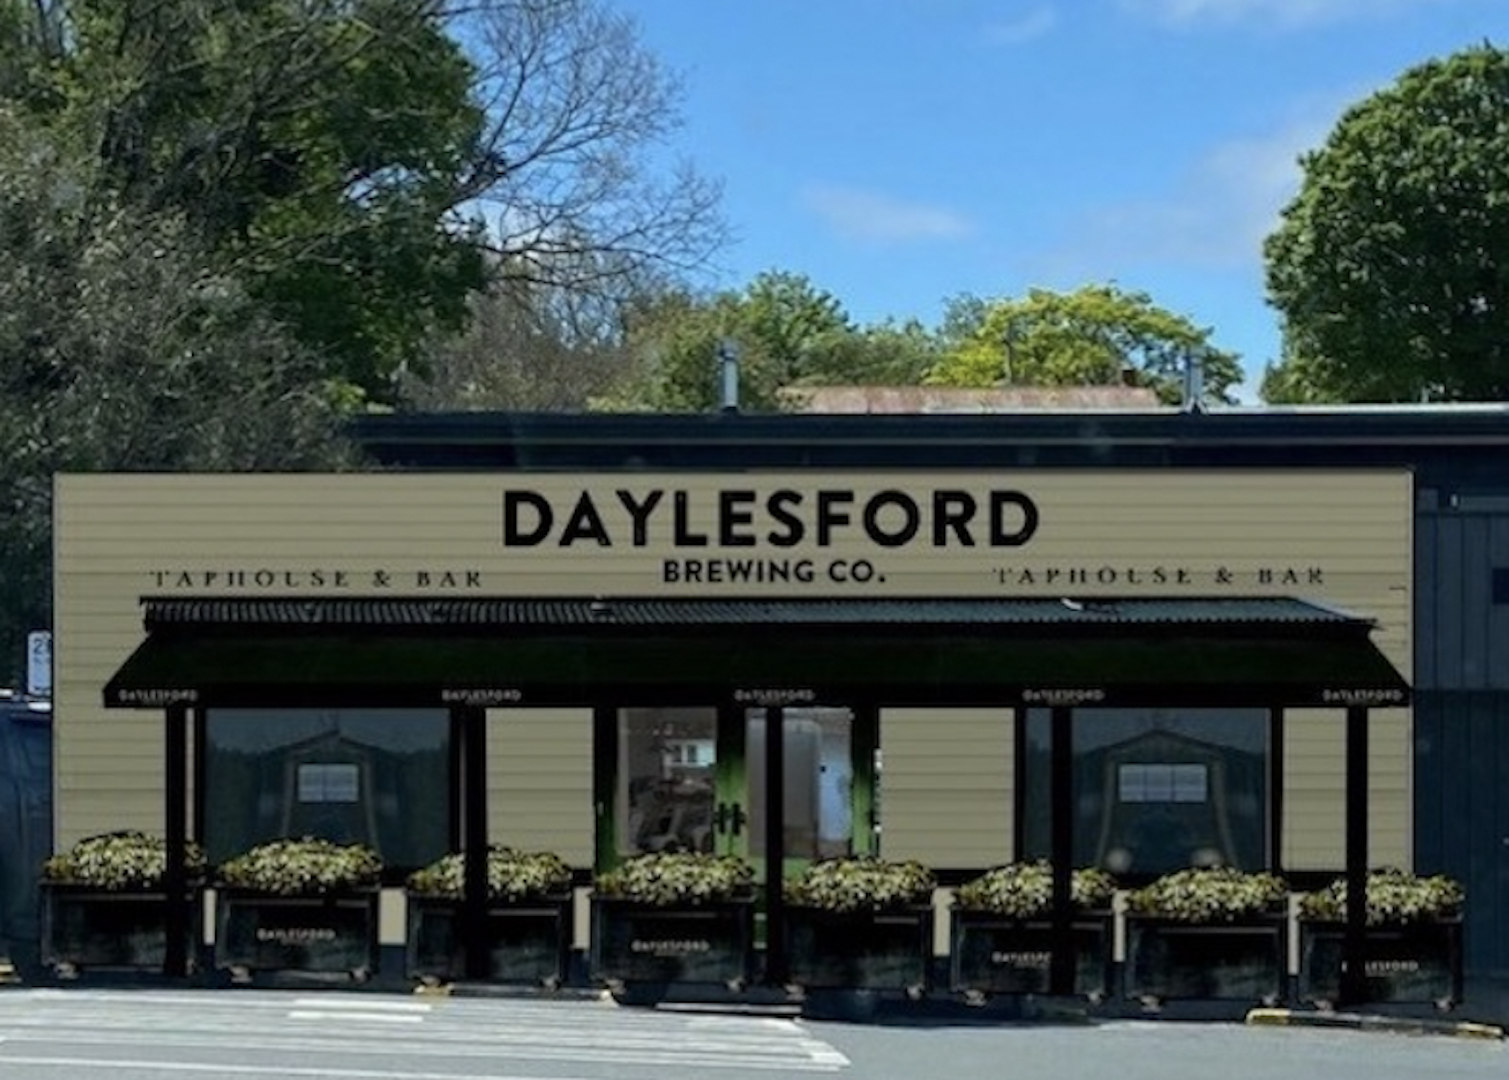 Daylesford Brewing Co' taproom